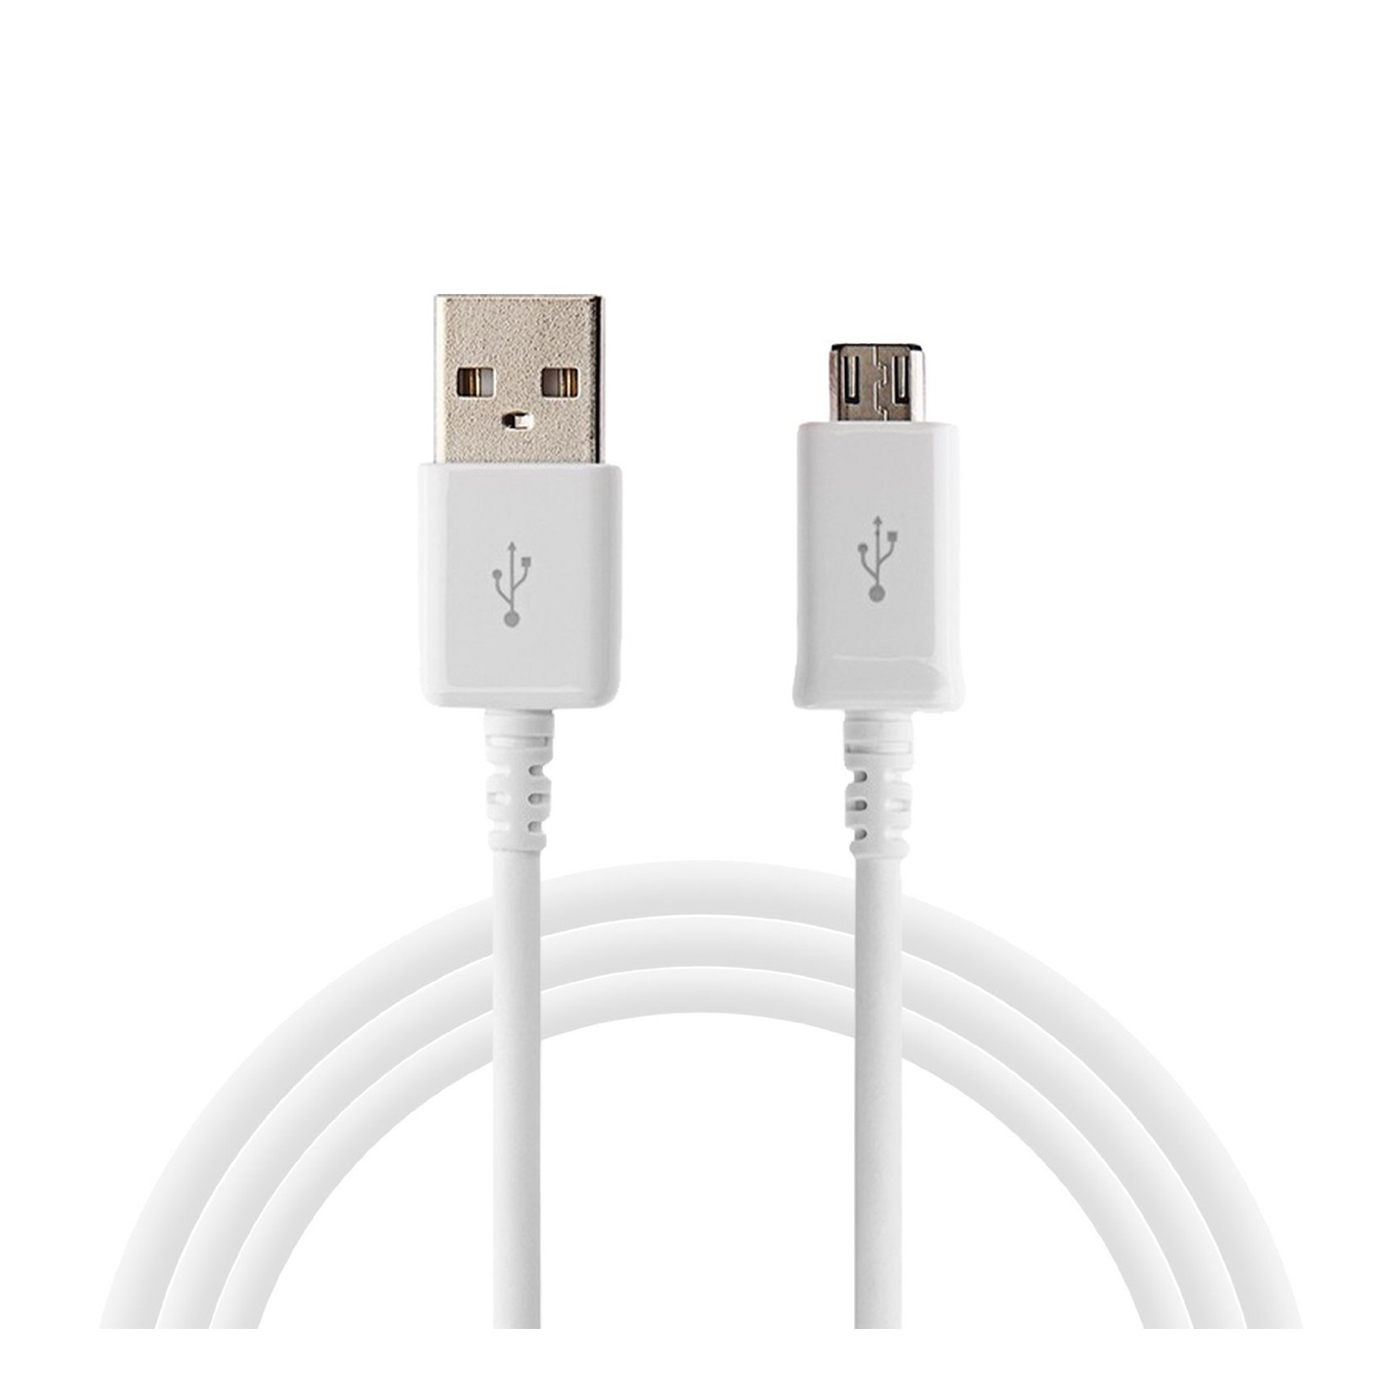 Micro USB to USB Charging Data Link Cable for Samsung Galaxy S4 S5 Tab 